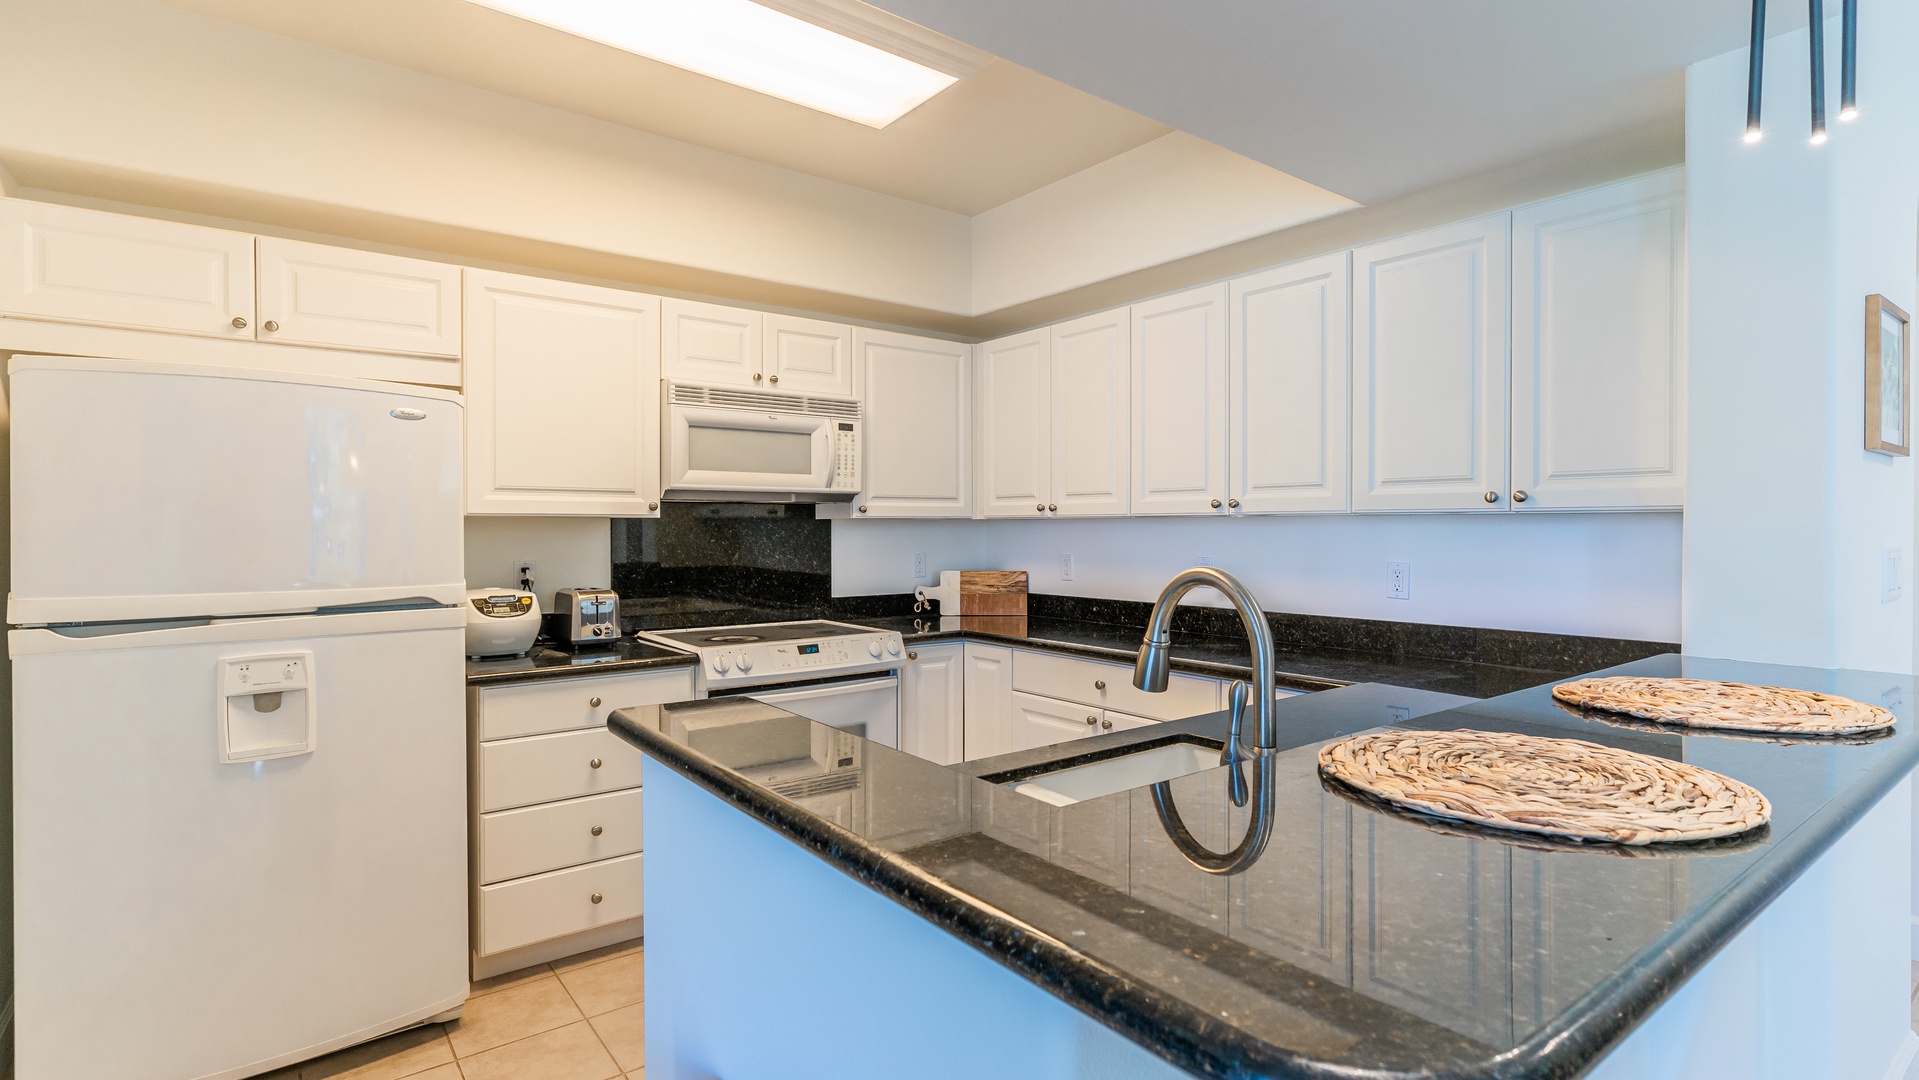 Kapolei Vacation Rentals, Ko Olina Kai 1033A - A beautiful kitchen with all the amenities for your culinary adventures.